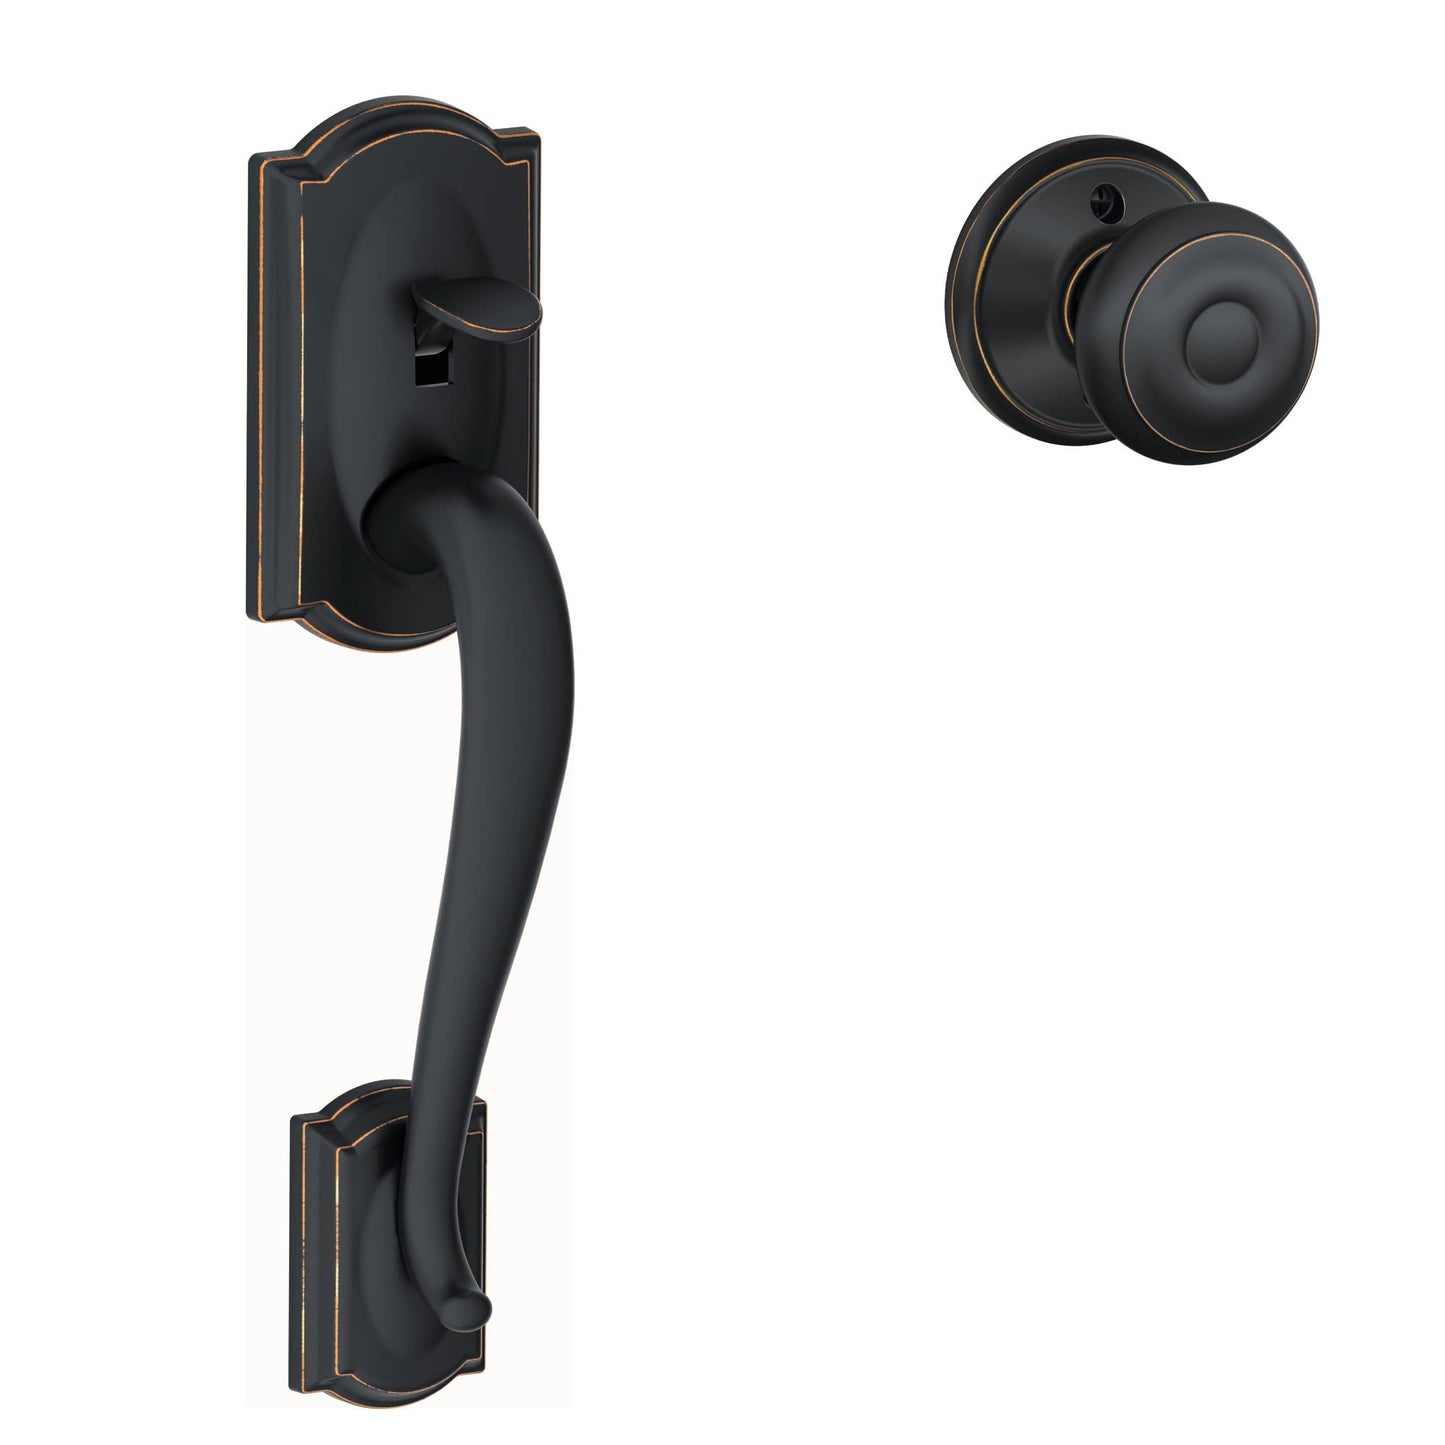 Schlage LOCK FE285 CAM 716 ACC RH Camelot Front Entry Handleset with Right-Handed Accent Lever Lower Half Grip, Standard Interior Trim, Aged Bronze